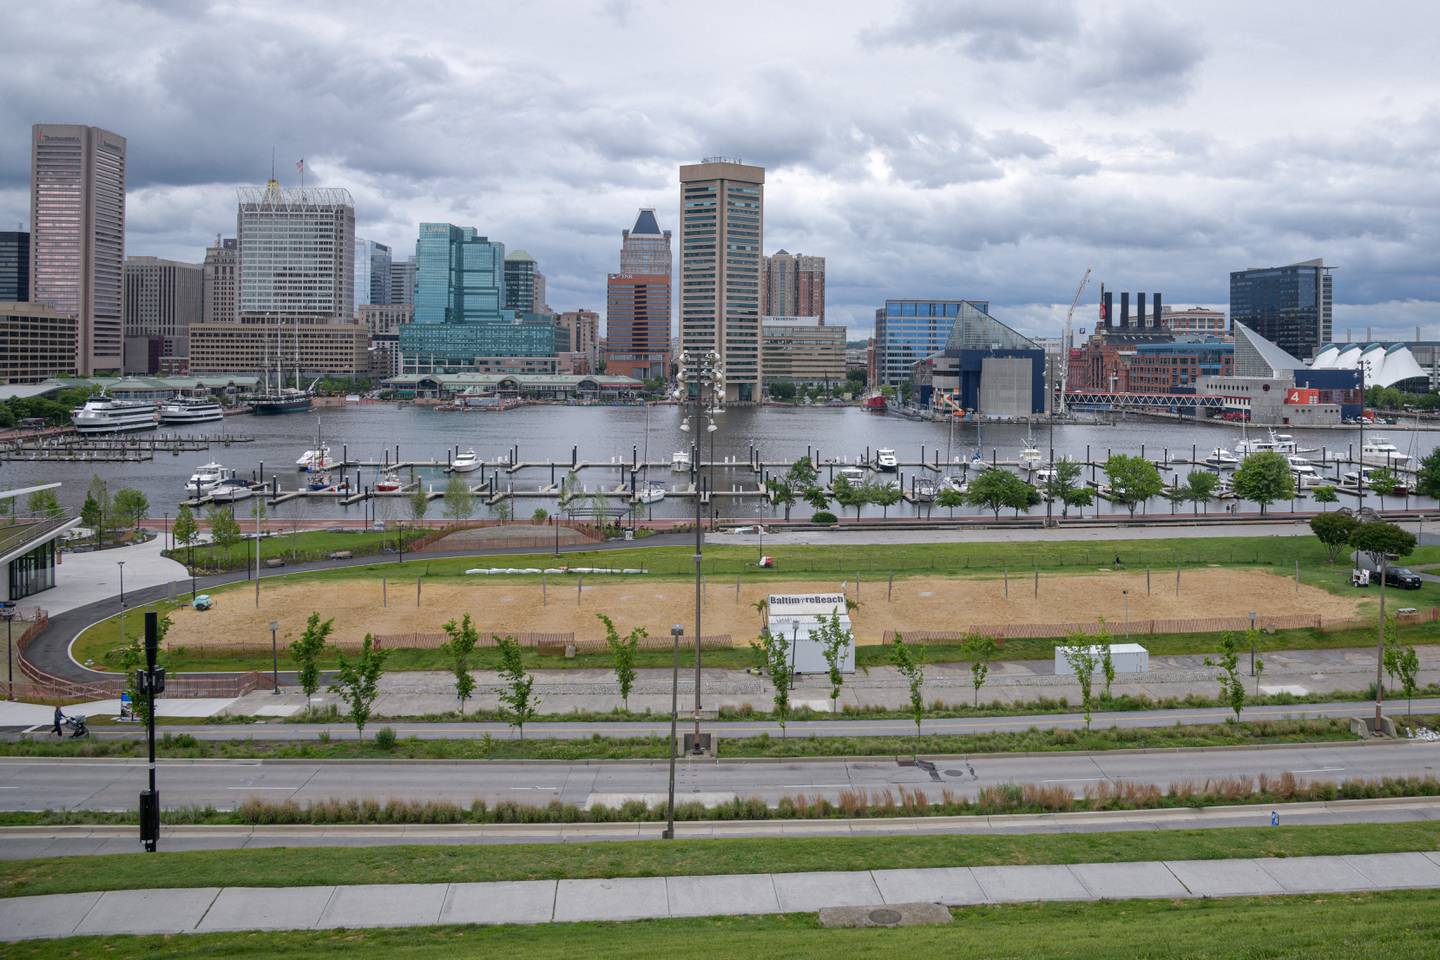 A view of the Baltimore City skyline, as seen from Federal Hill in South Baltimore.